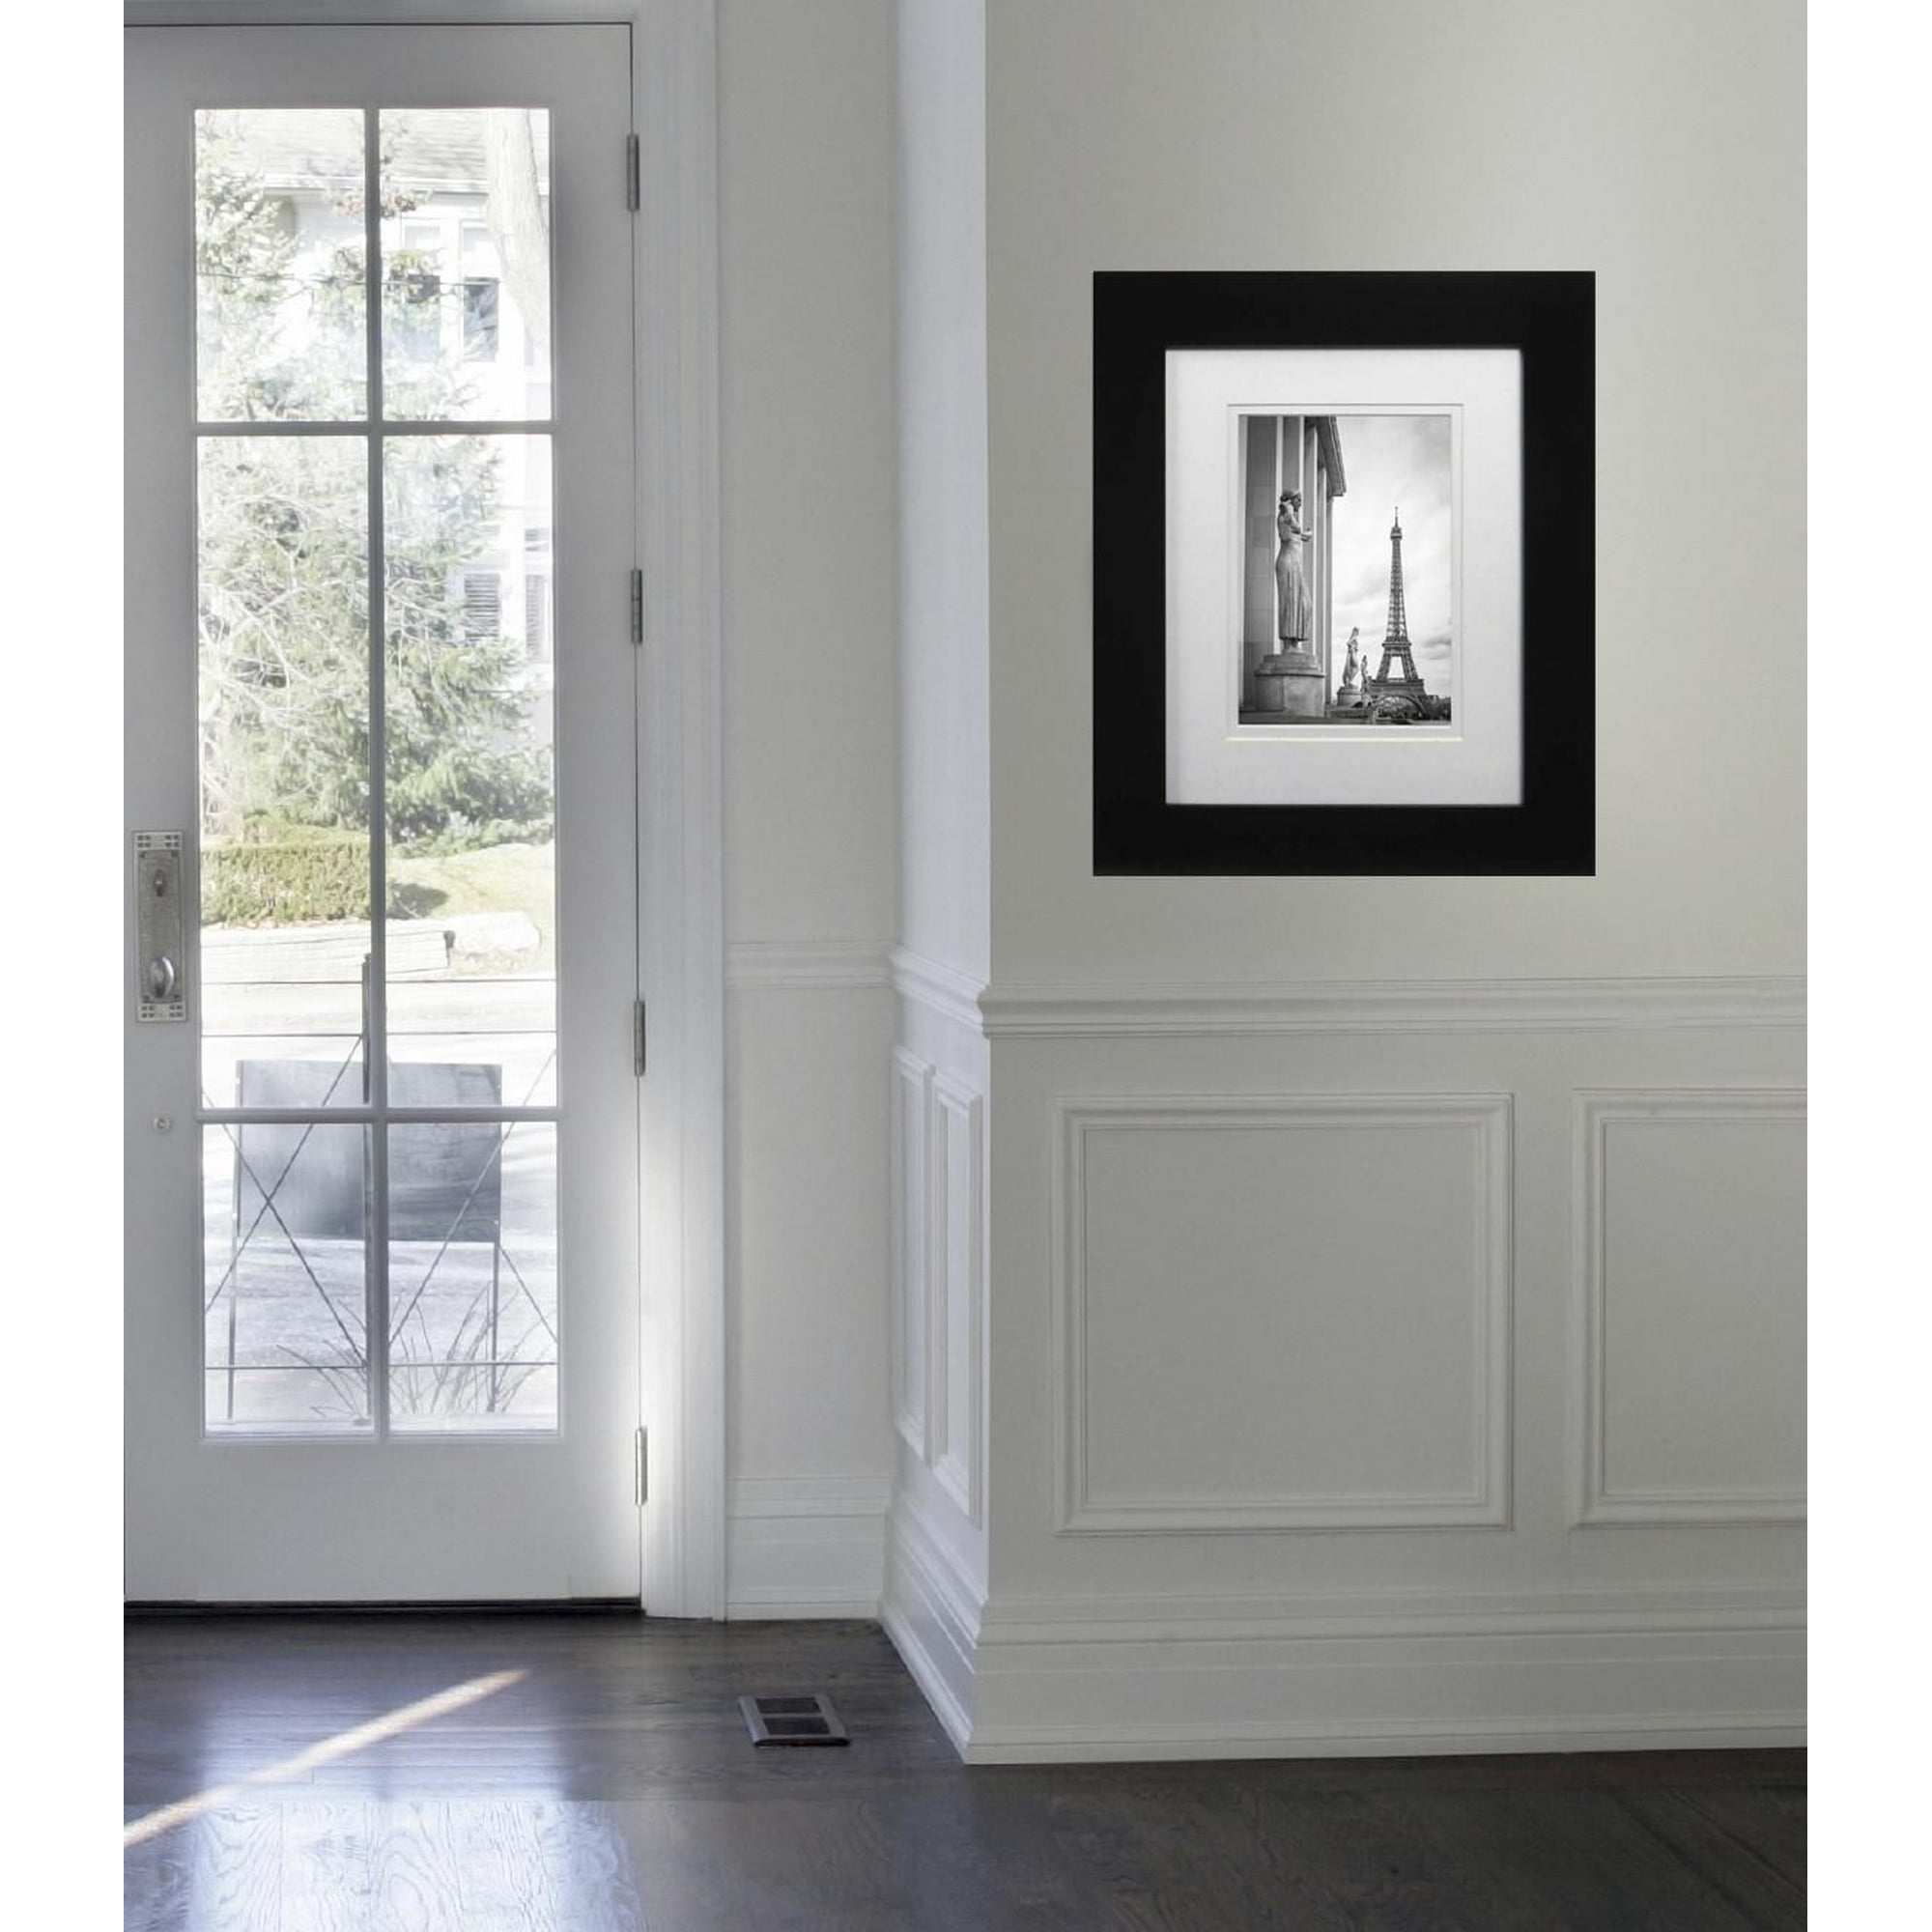 hometrends Museum Frame 11x14 inch, 11x14 inch, black 